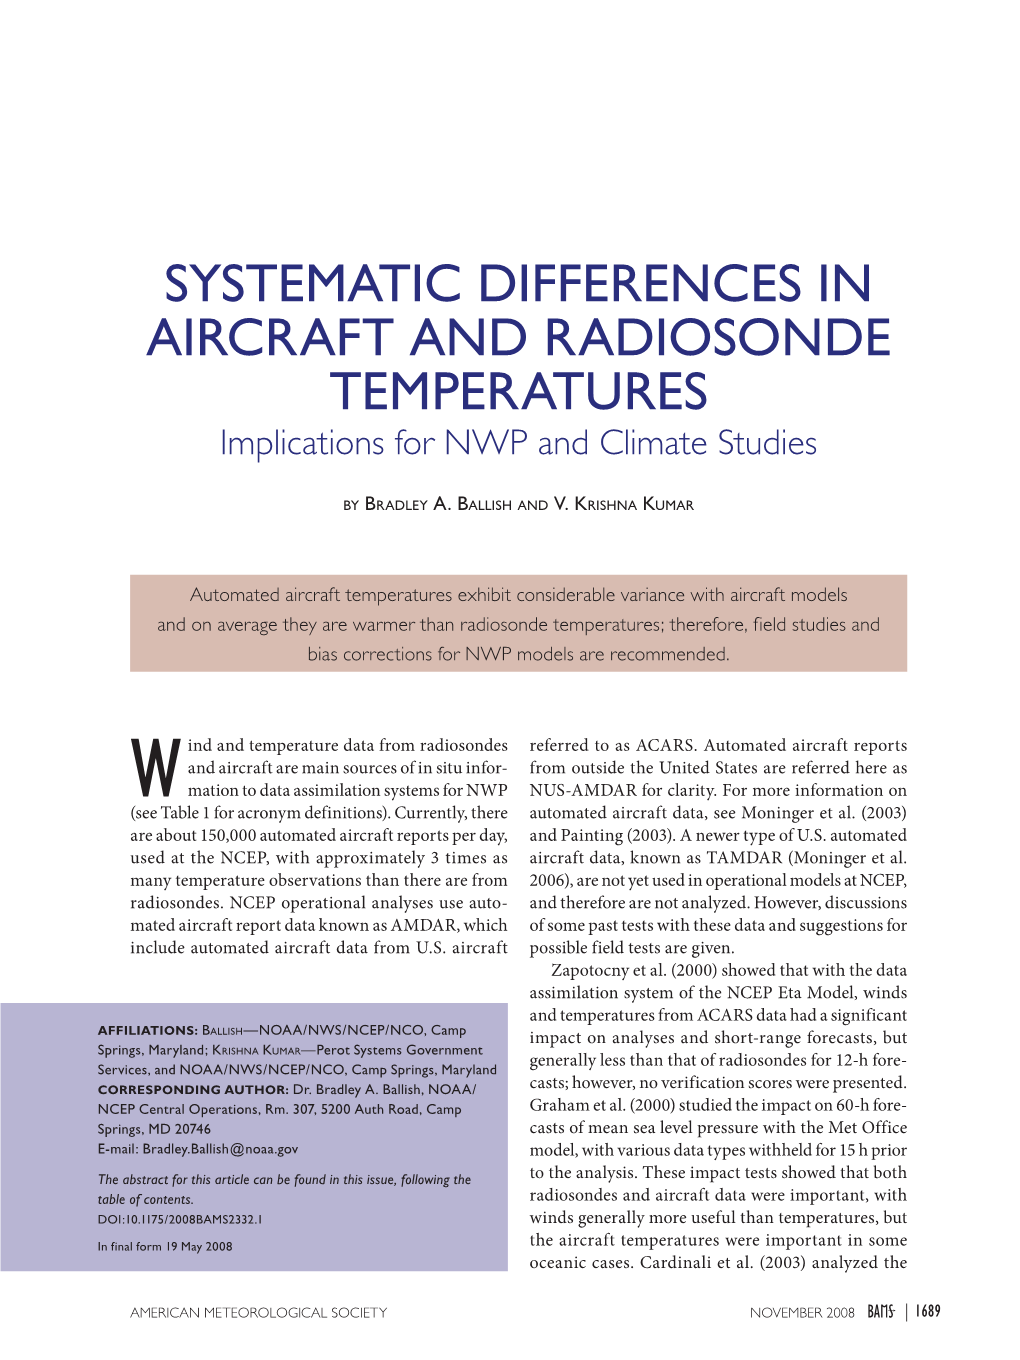 SYSTEMATIC DIFFERENCES in AIRCRAFT and RADIOSONDE TEMPERATURES Implications for NWP and Climate Studies